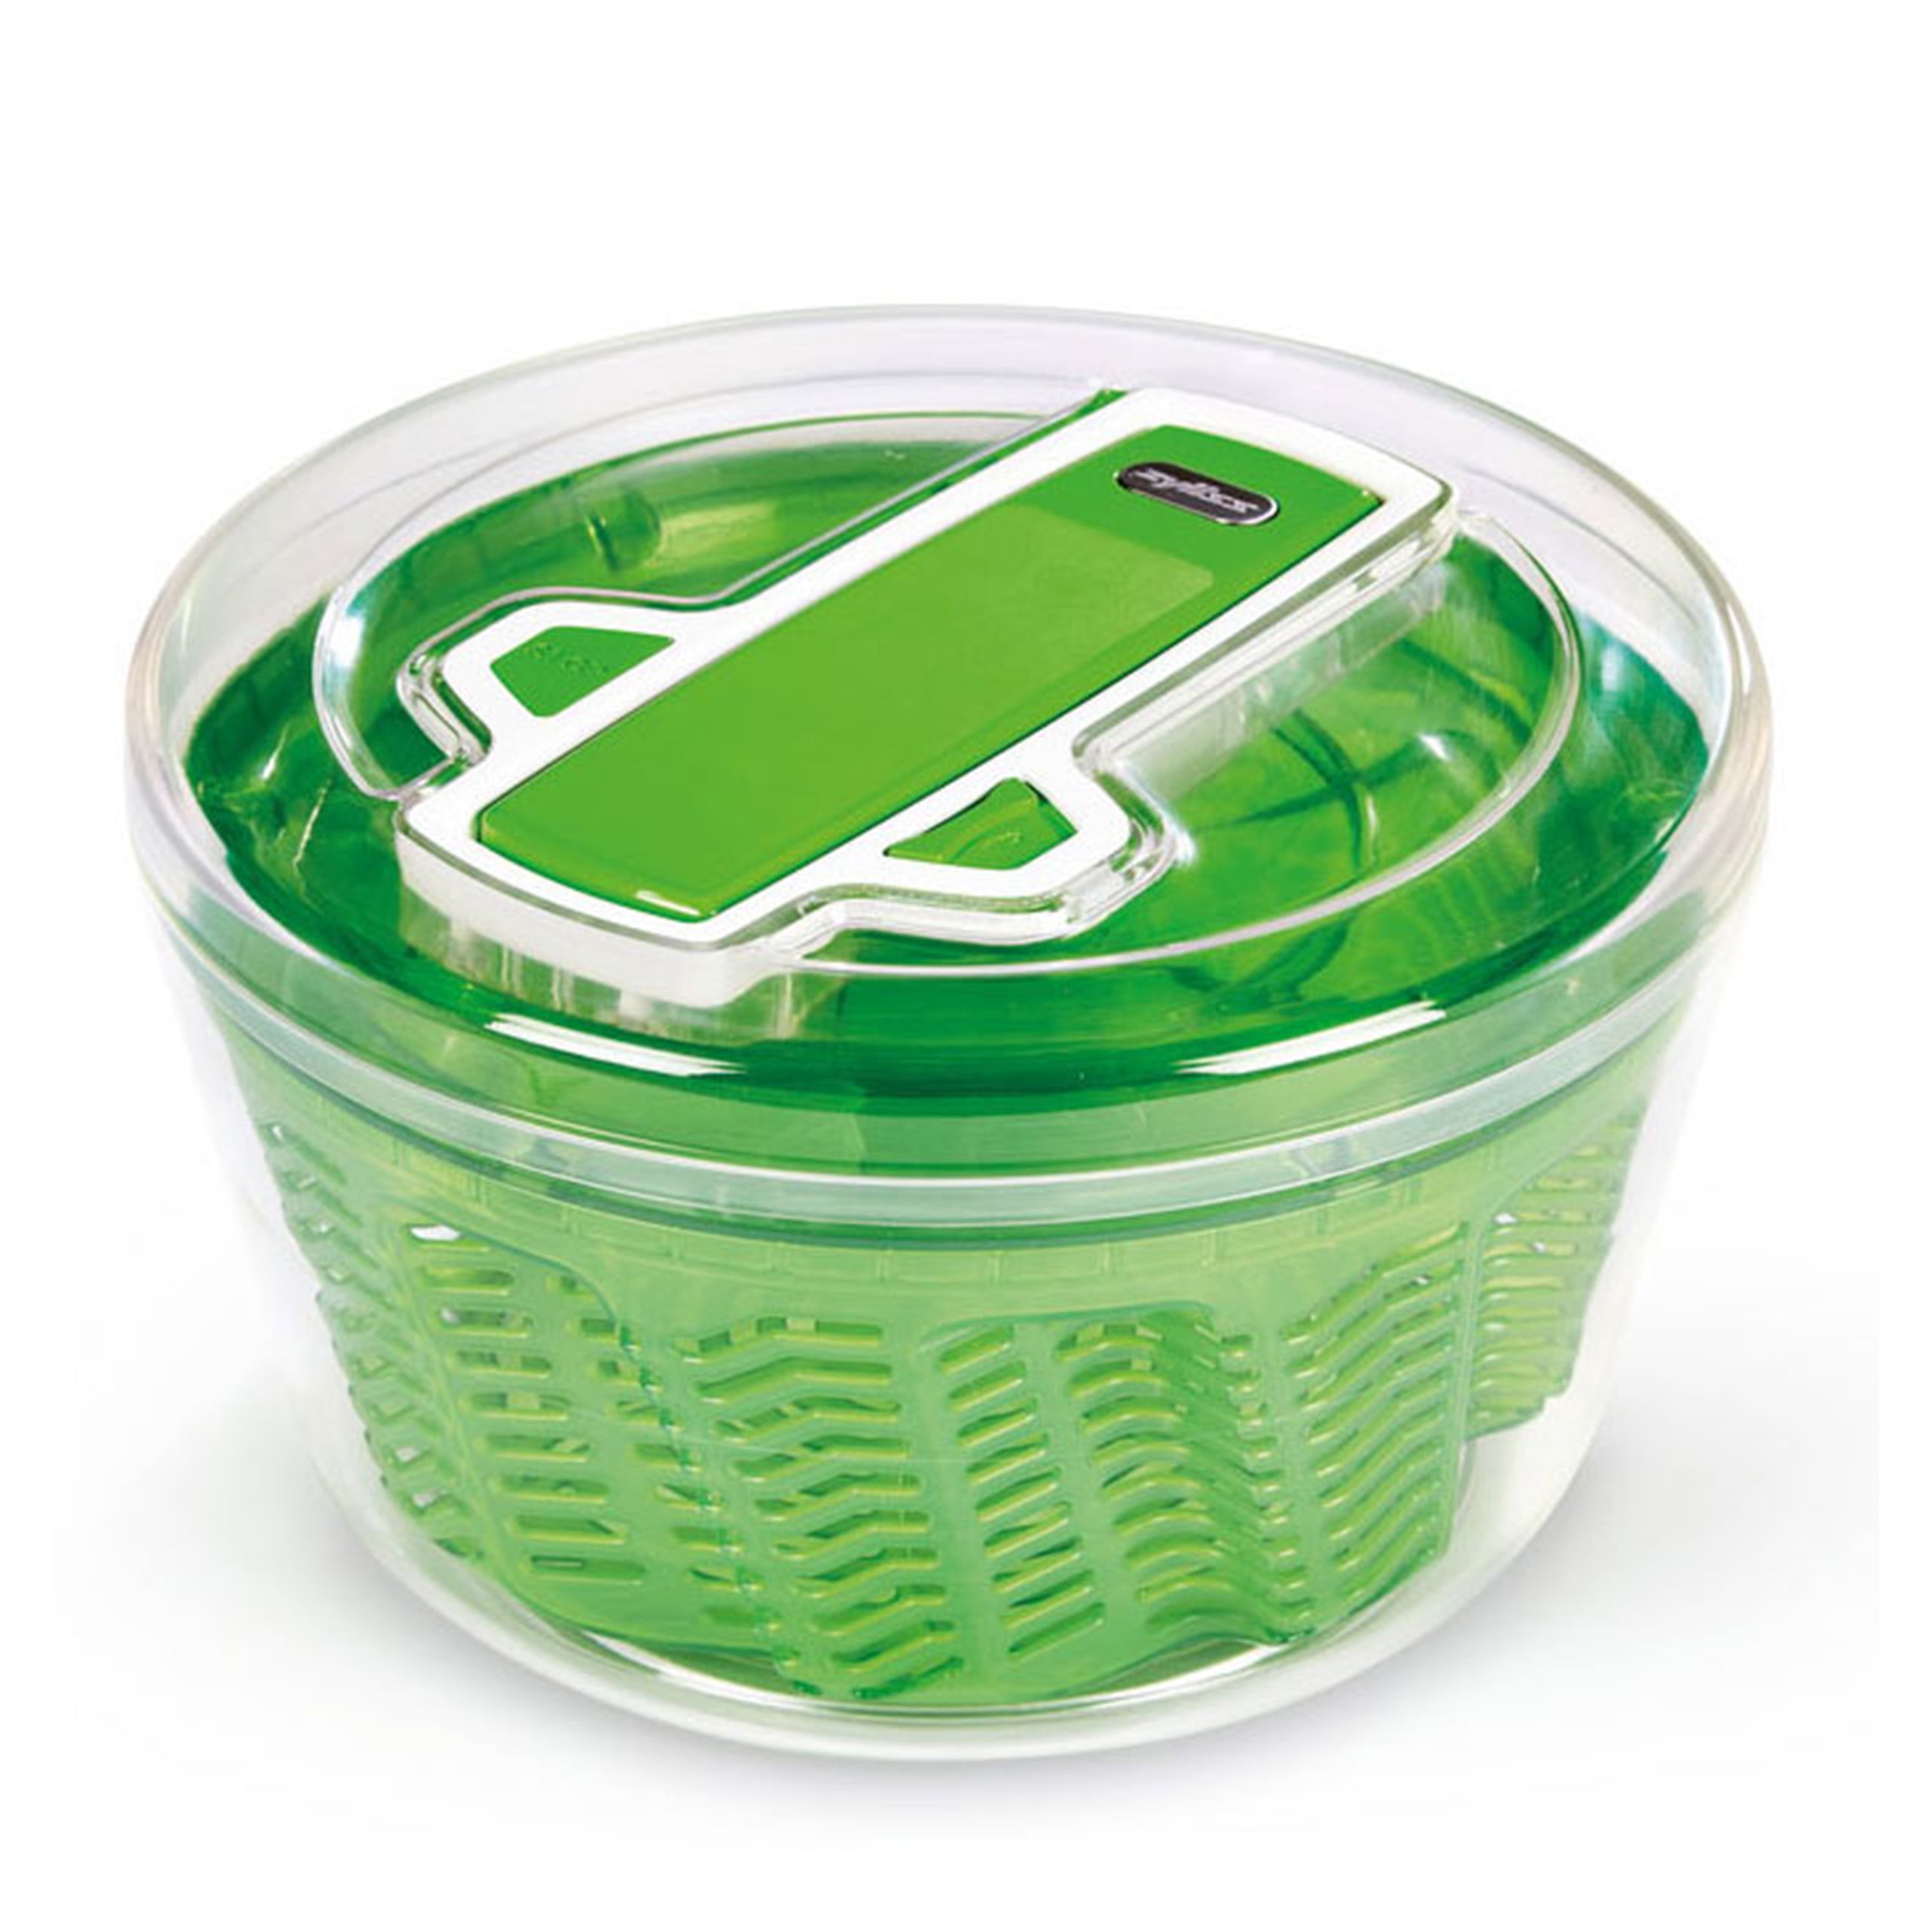 Oxo Large Salad Spinner